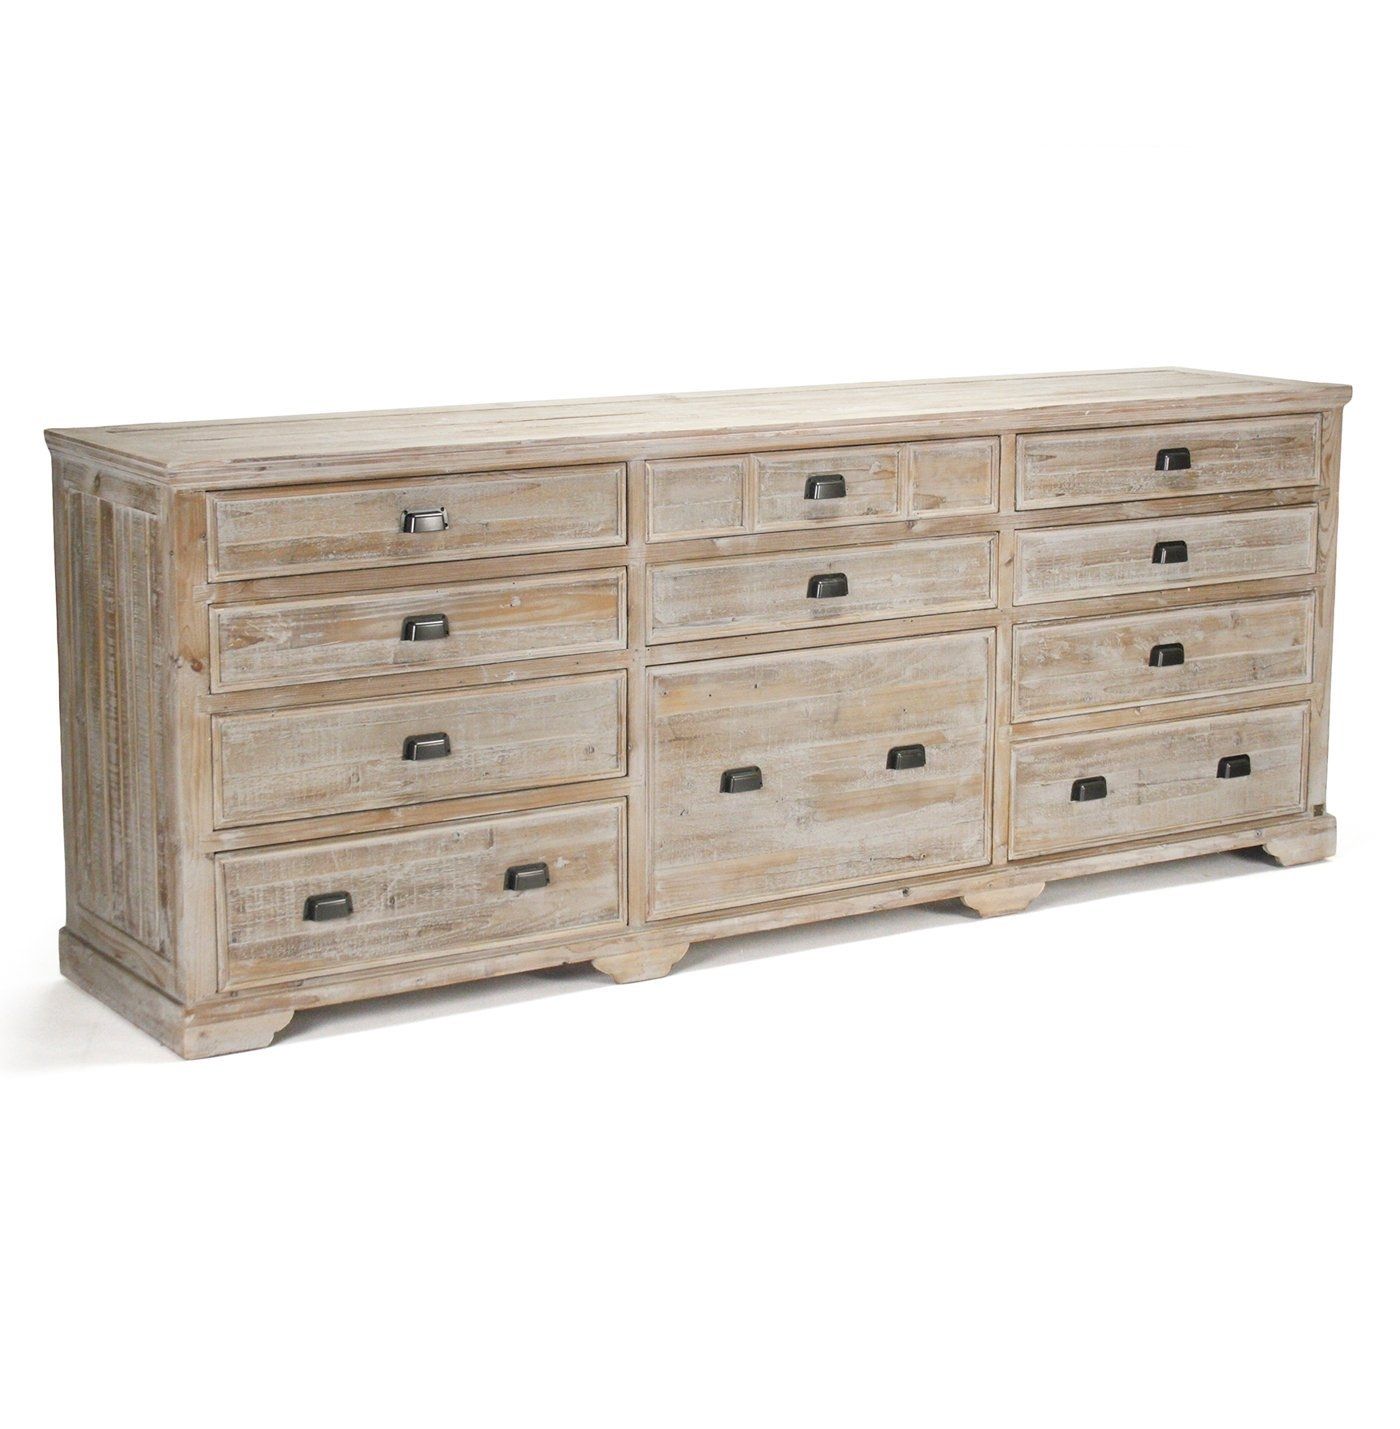 Cheap Reclaimed Sideboard, Find Reclaimed Sideboard Deals On Line At Inside White Wash 4 Door Galvanized Sideboards (View 3 of 30)